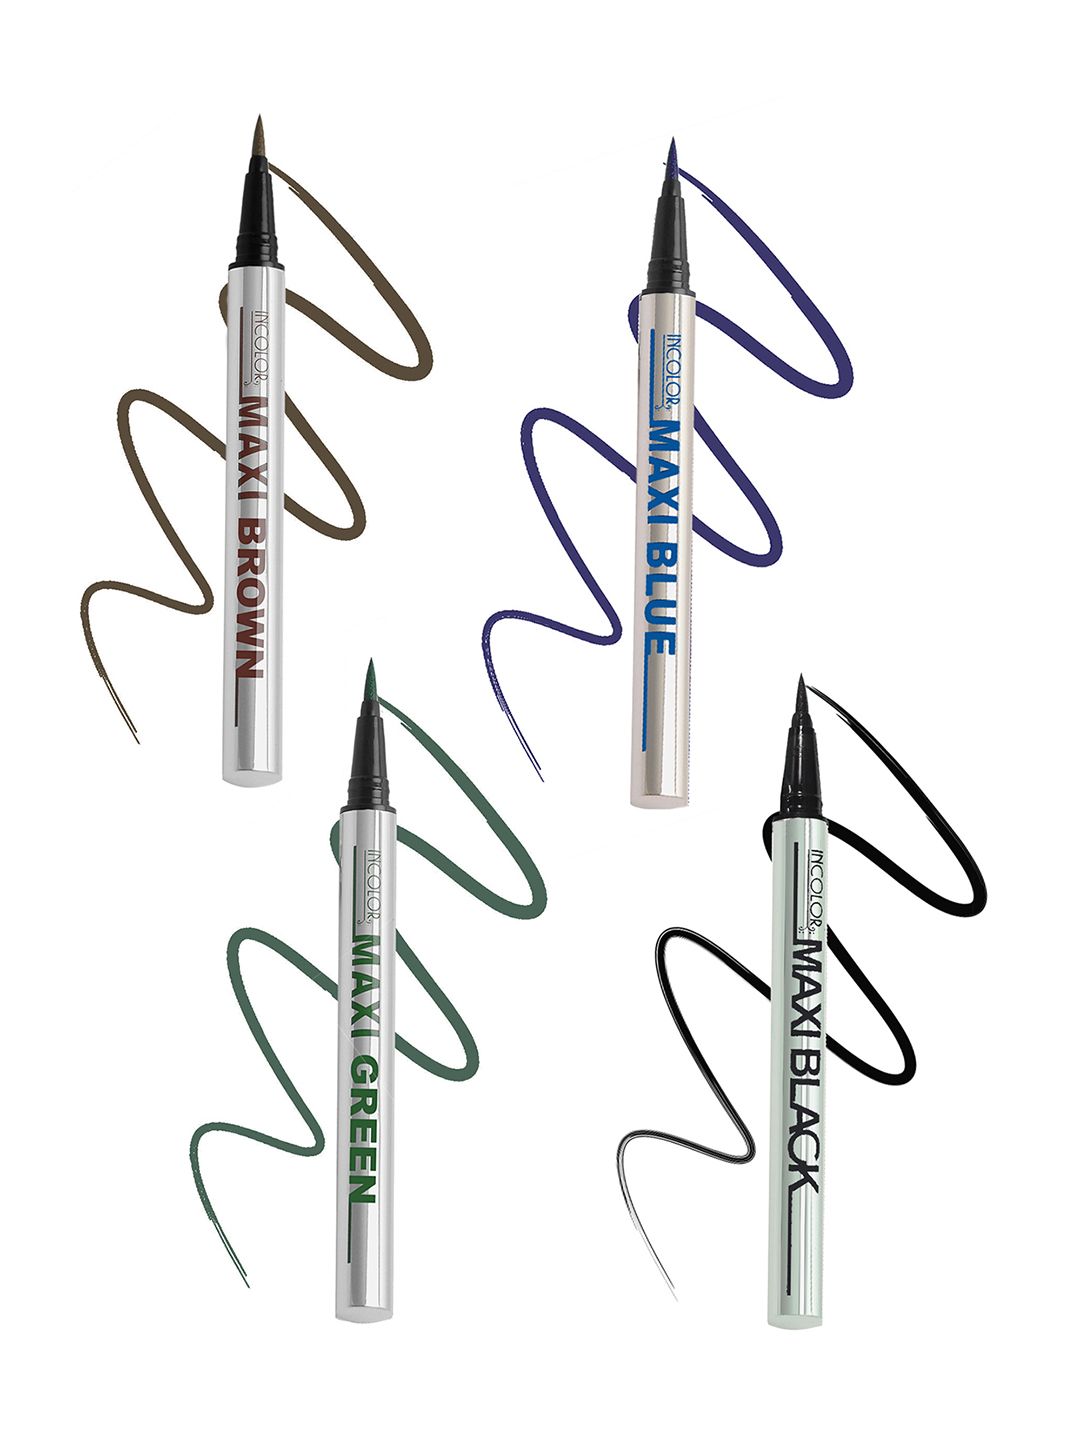 INCOLOR Pack of 13 Maxi Pen Eyeliner - 2 g each Price in India